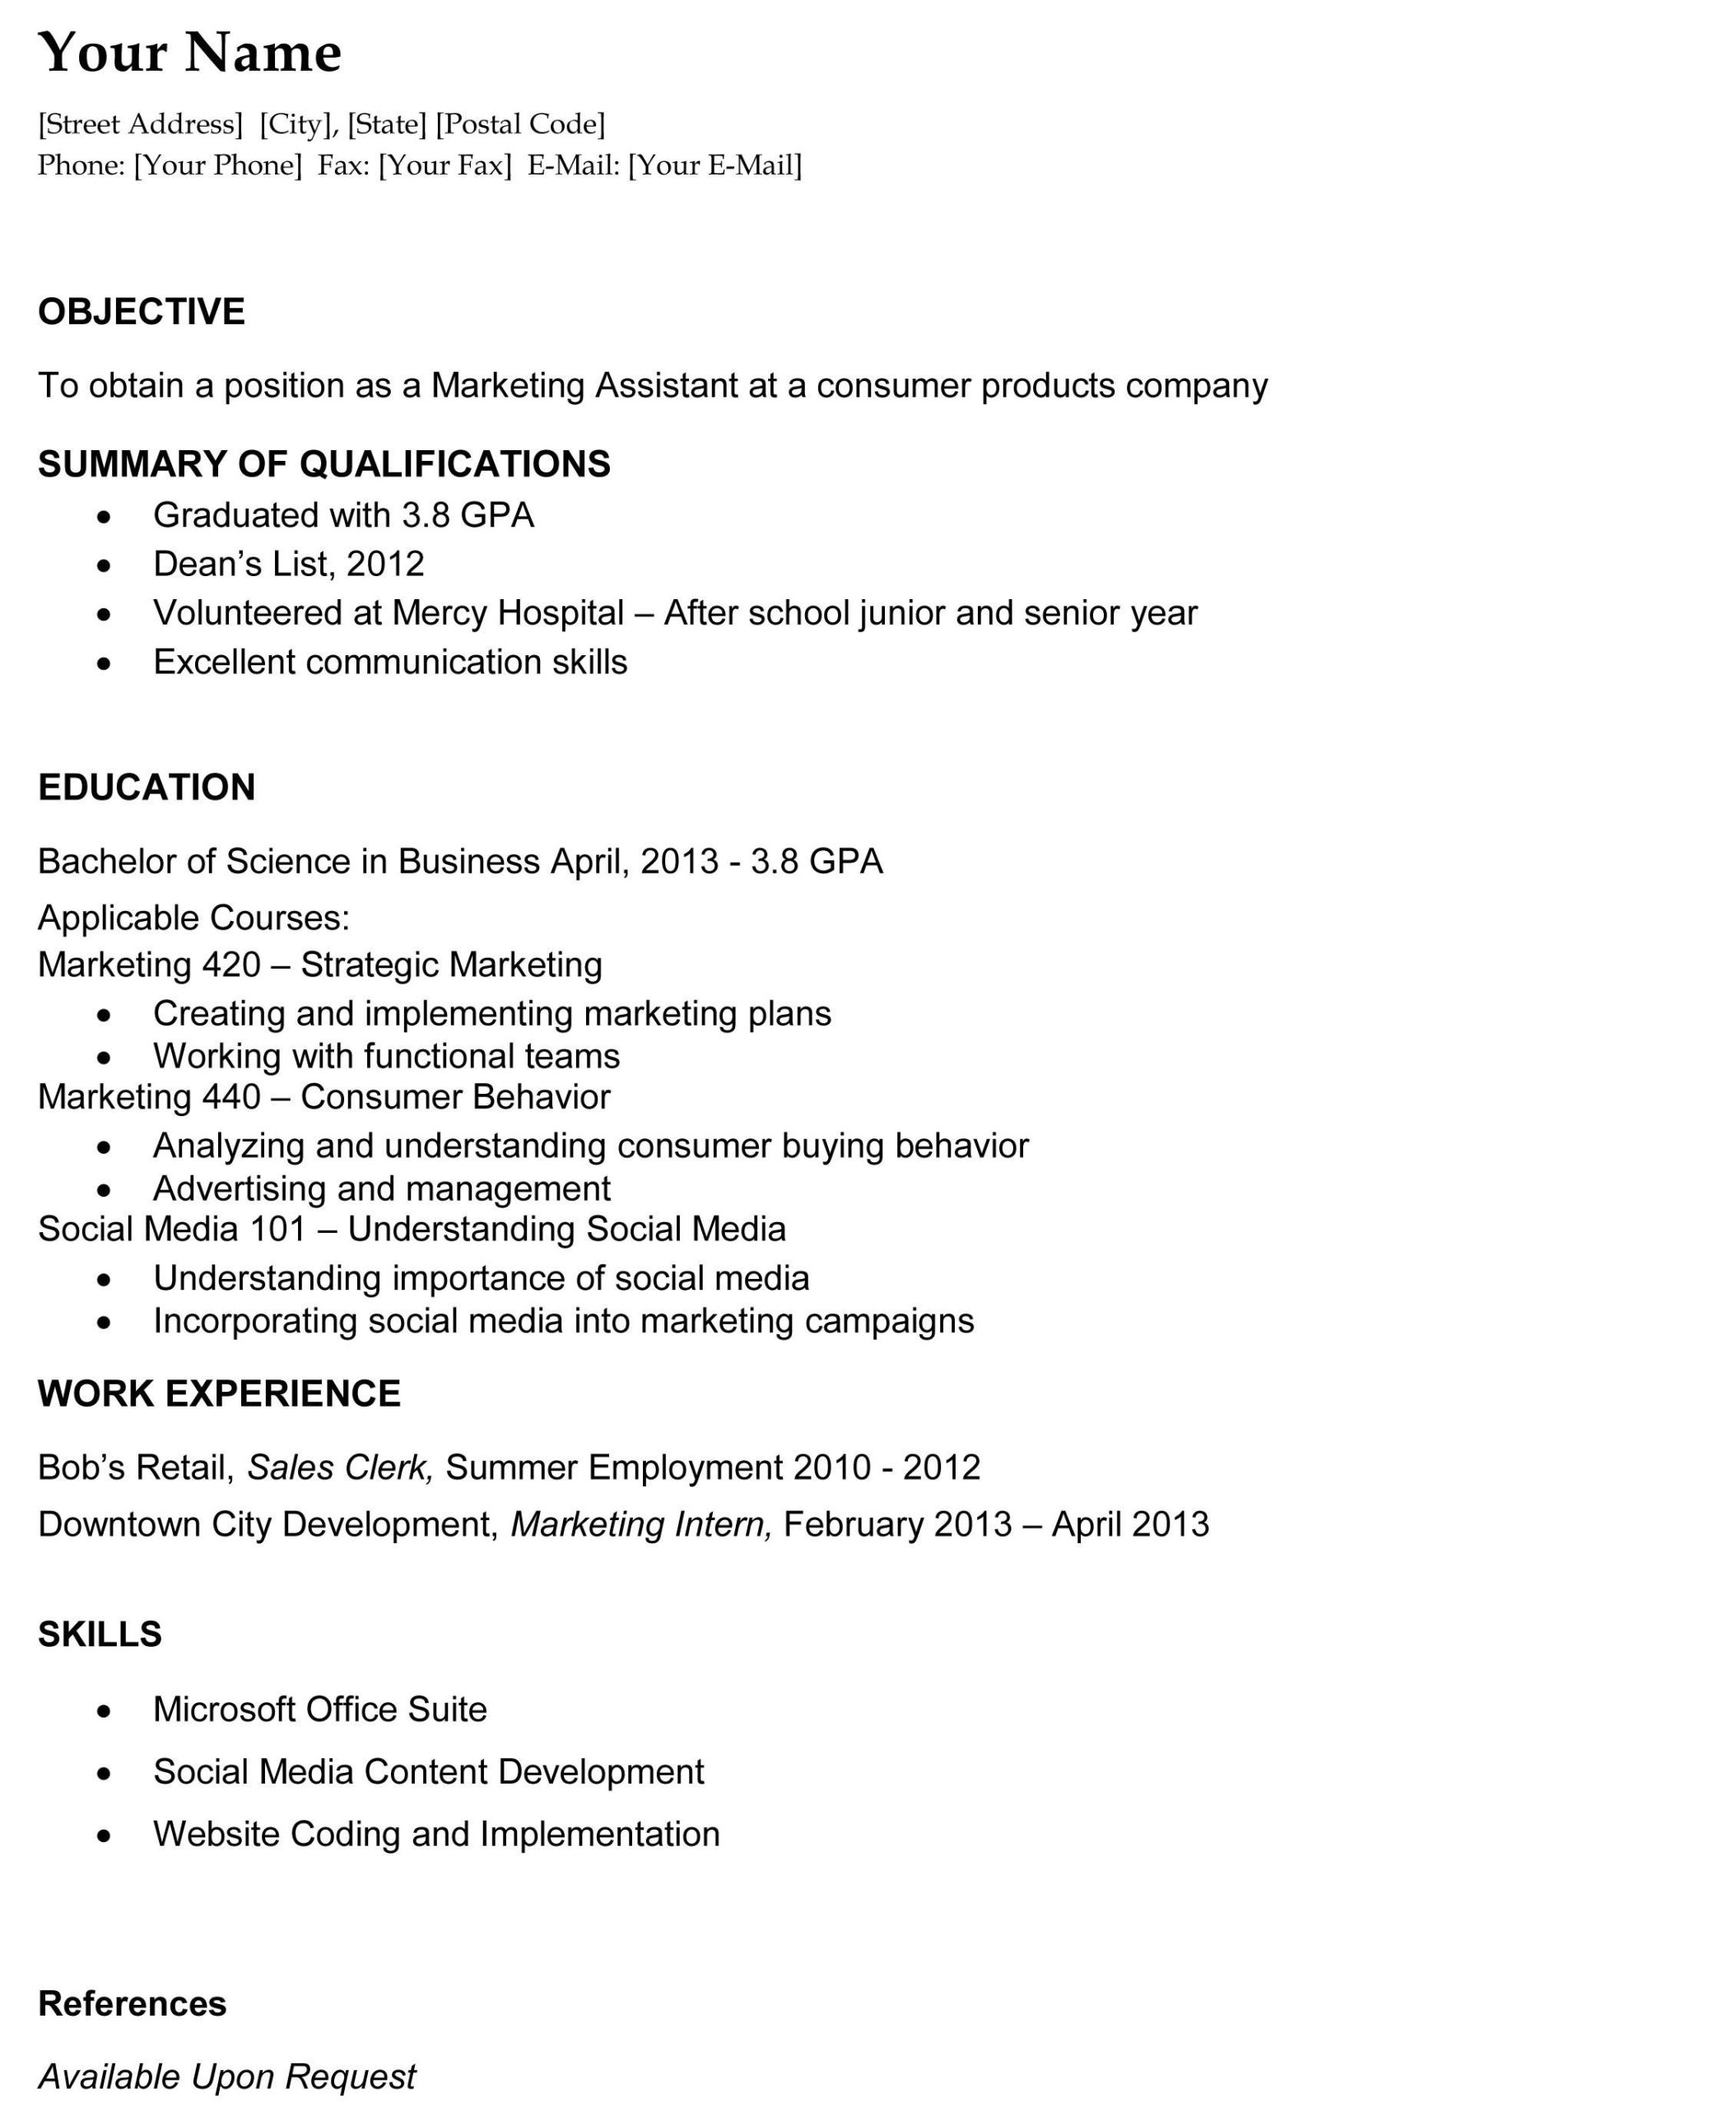 Sample Objective Statement for College Resume College Resume Template – Http://www.jobresume.website/college …